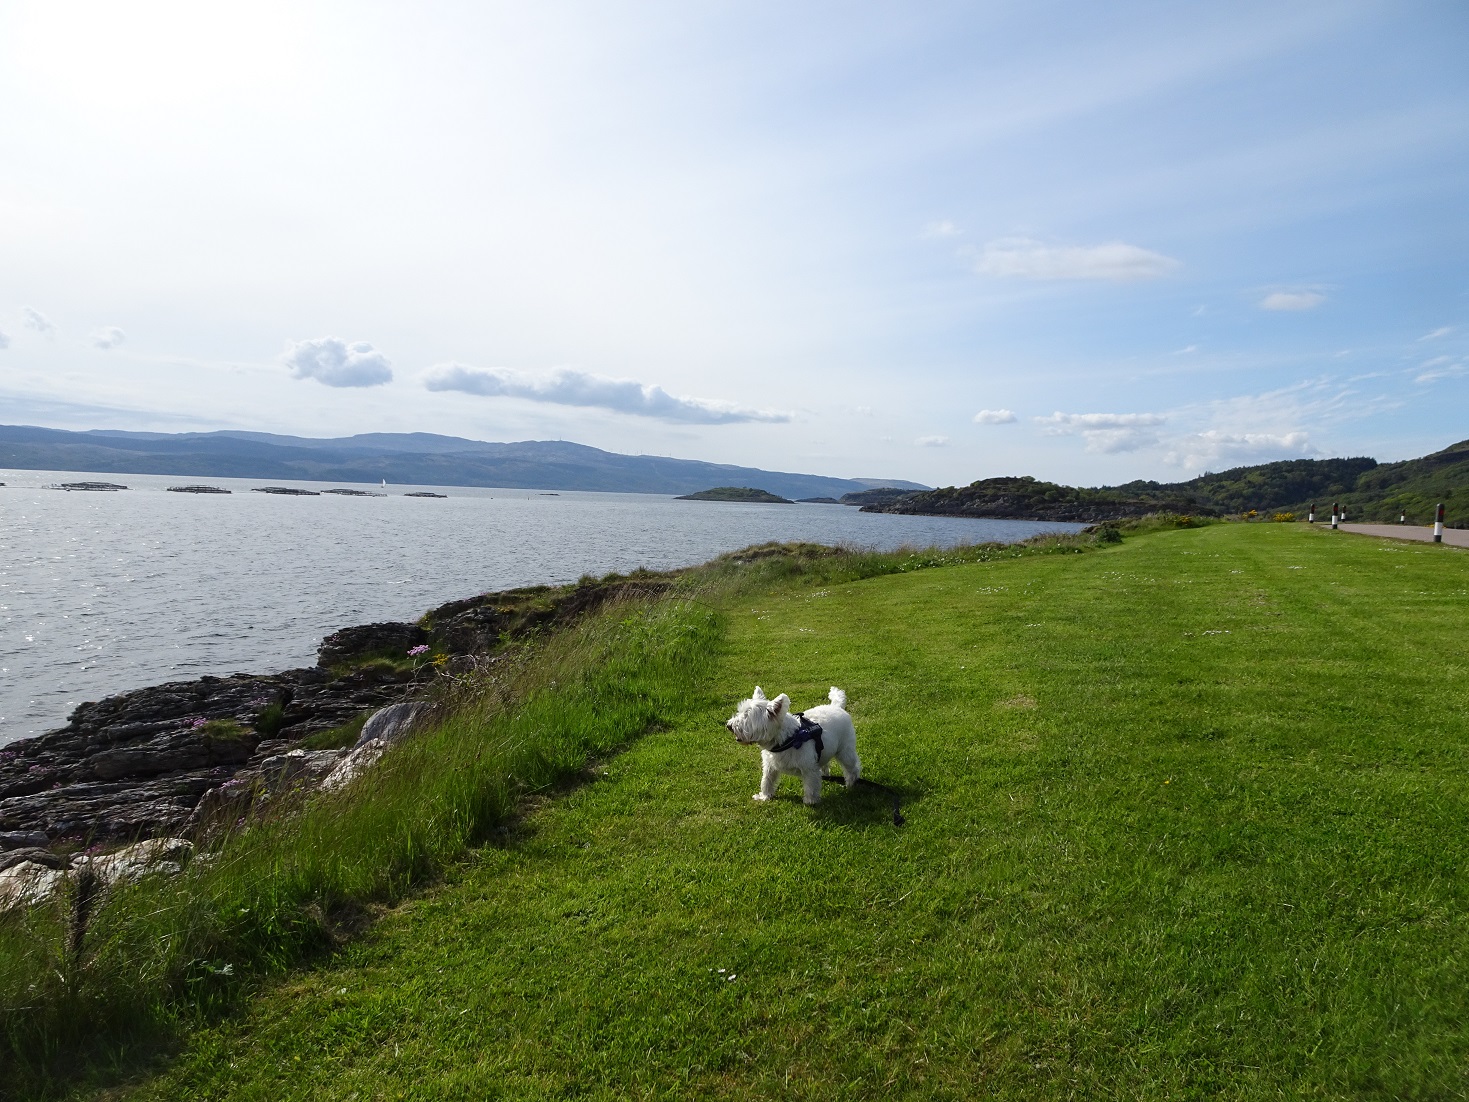 Poppy the Westie finds a good place to play ball at Portavadie